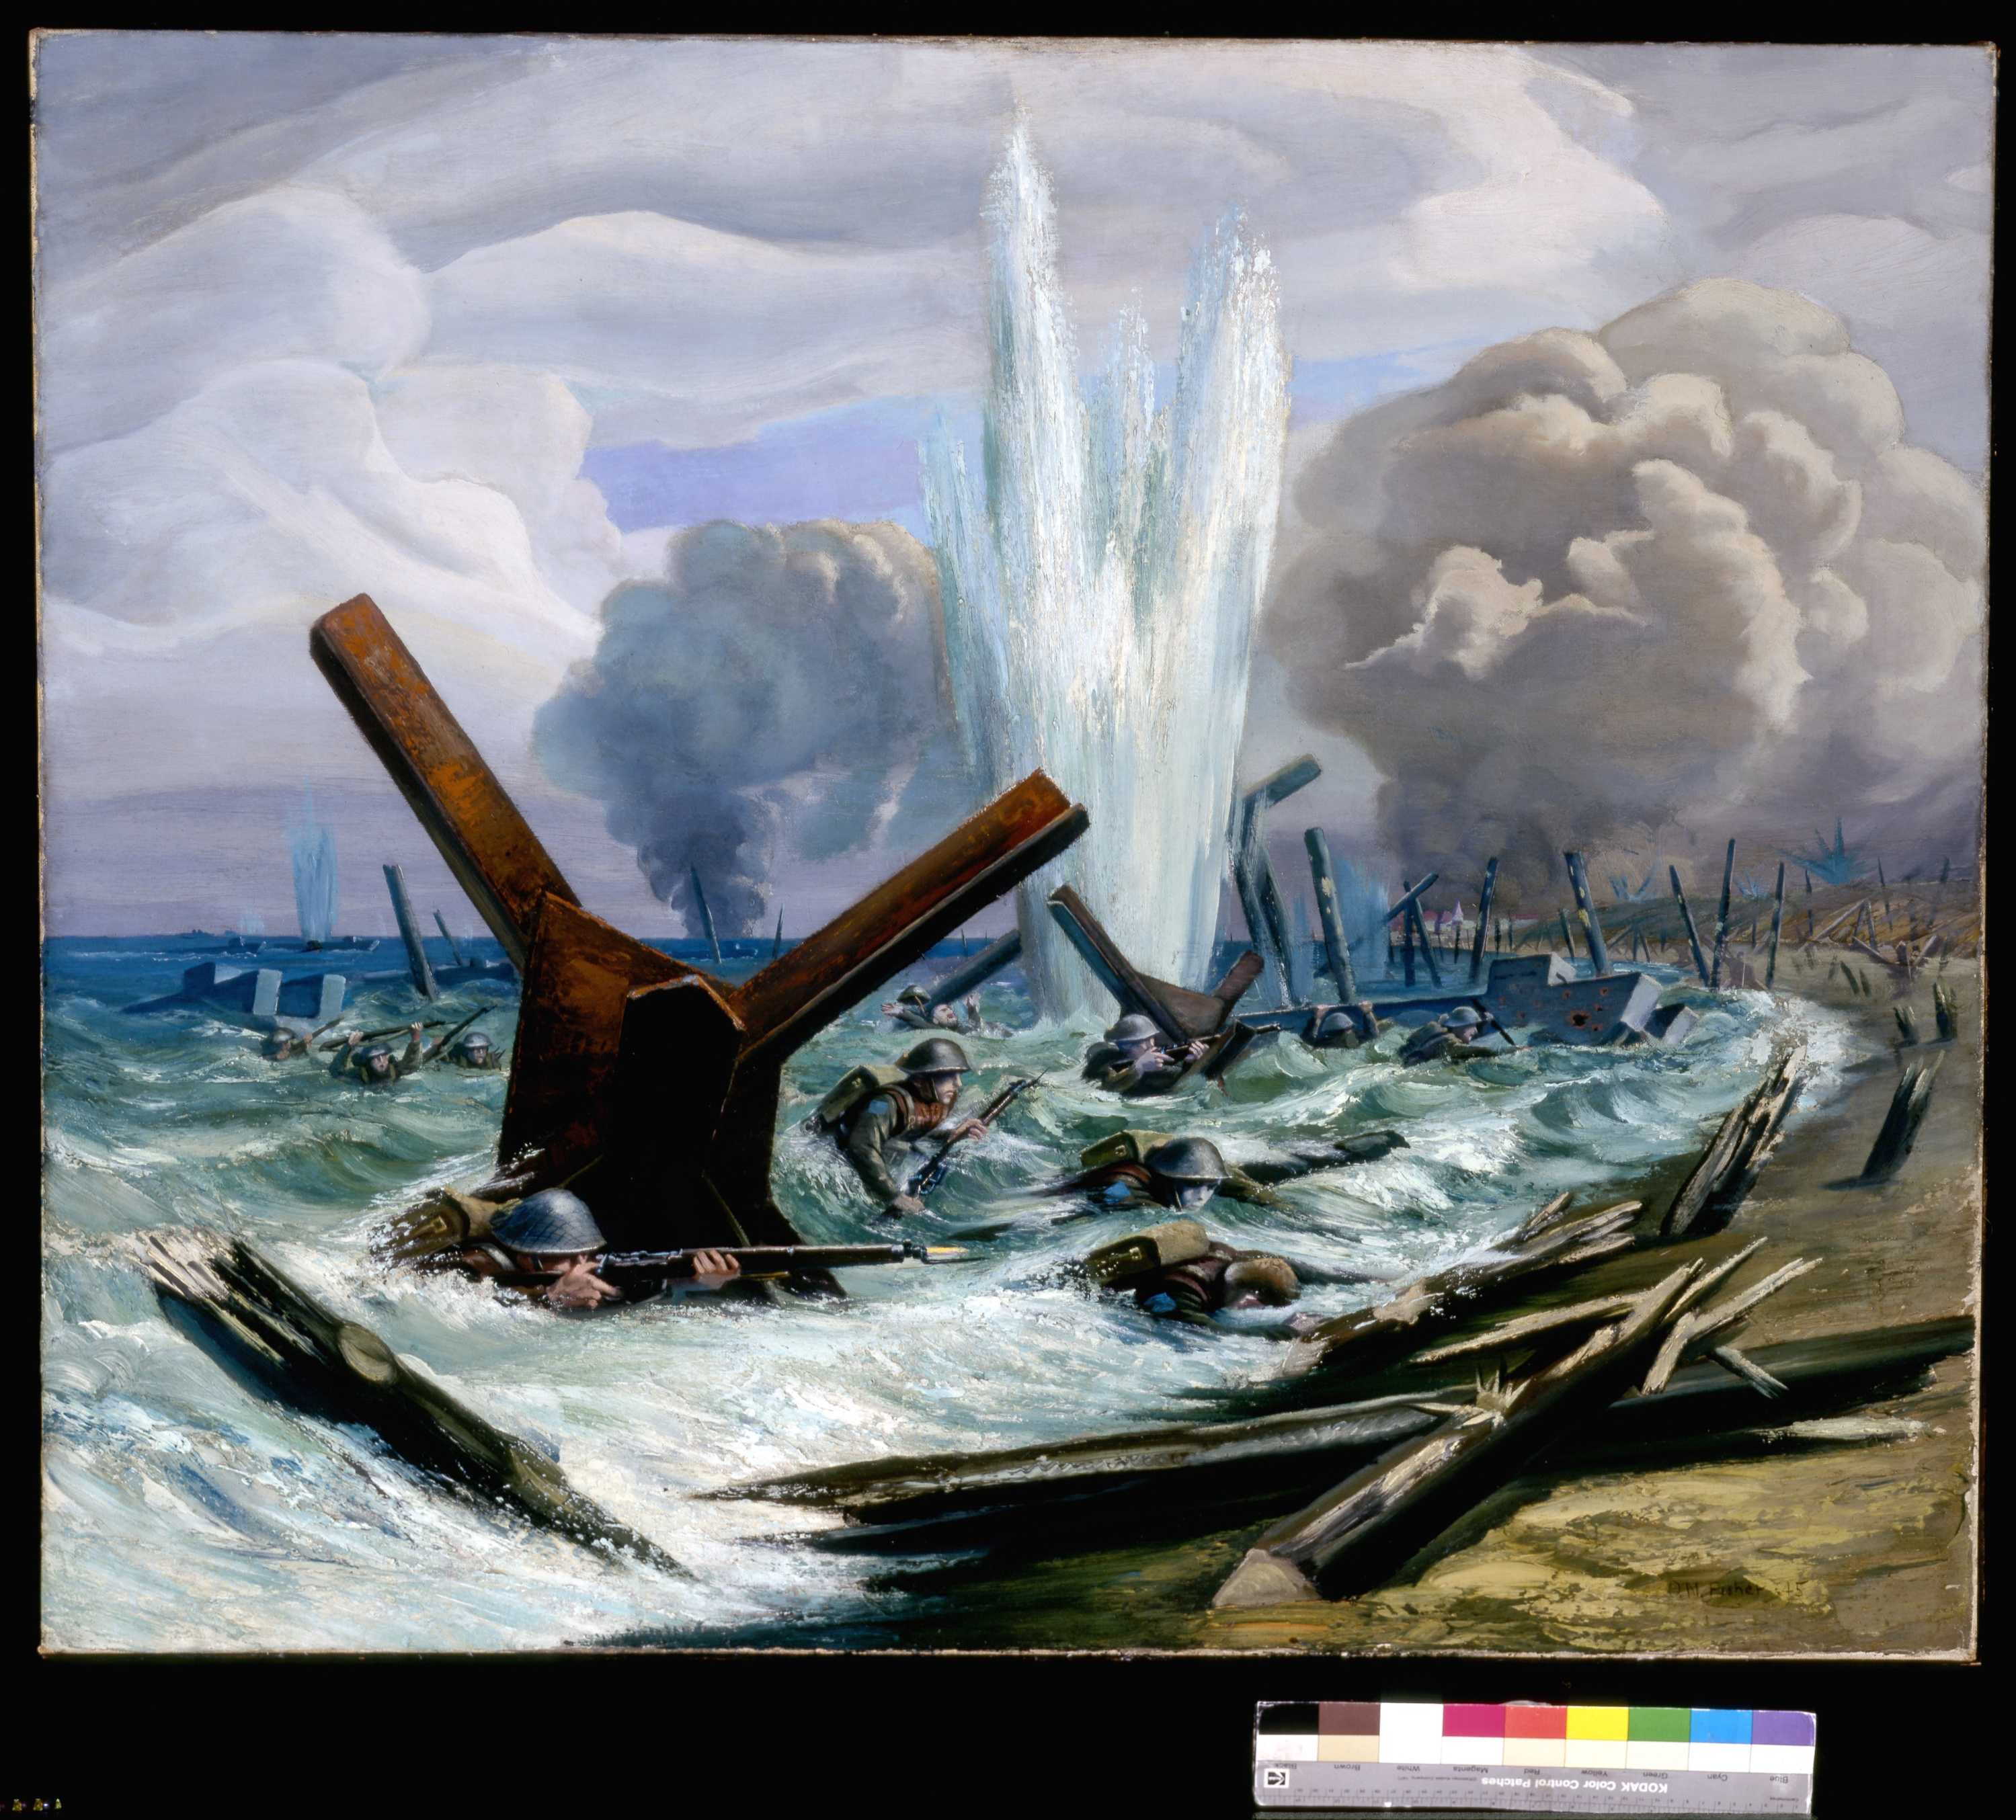 Painting. Soldiers navigate the heavy waves to reach the sandy beach. Beach defences and debris litter the ground. Explosions and smoke in the distance.